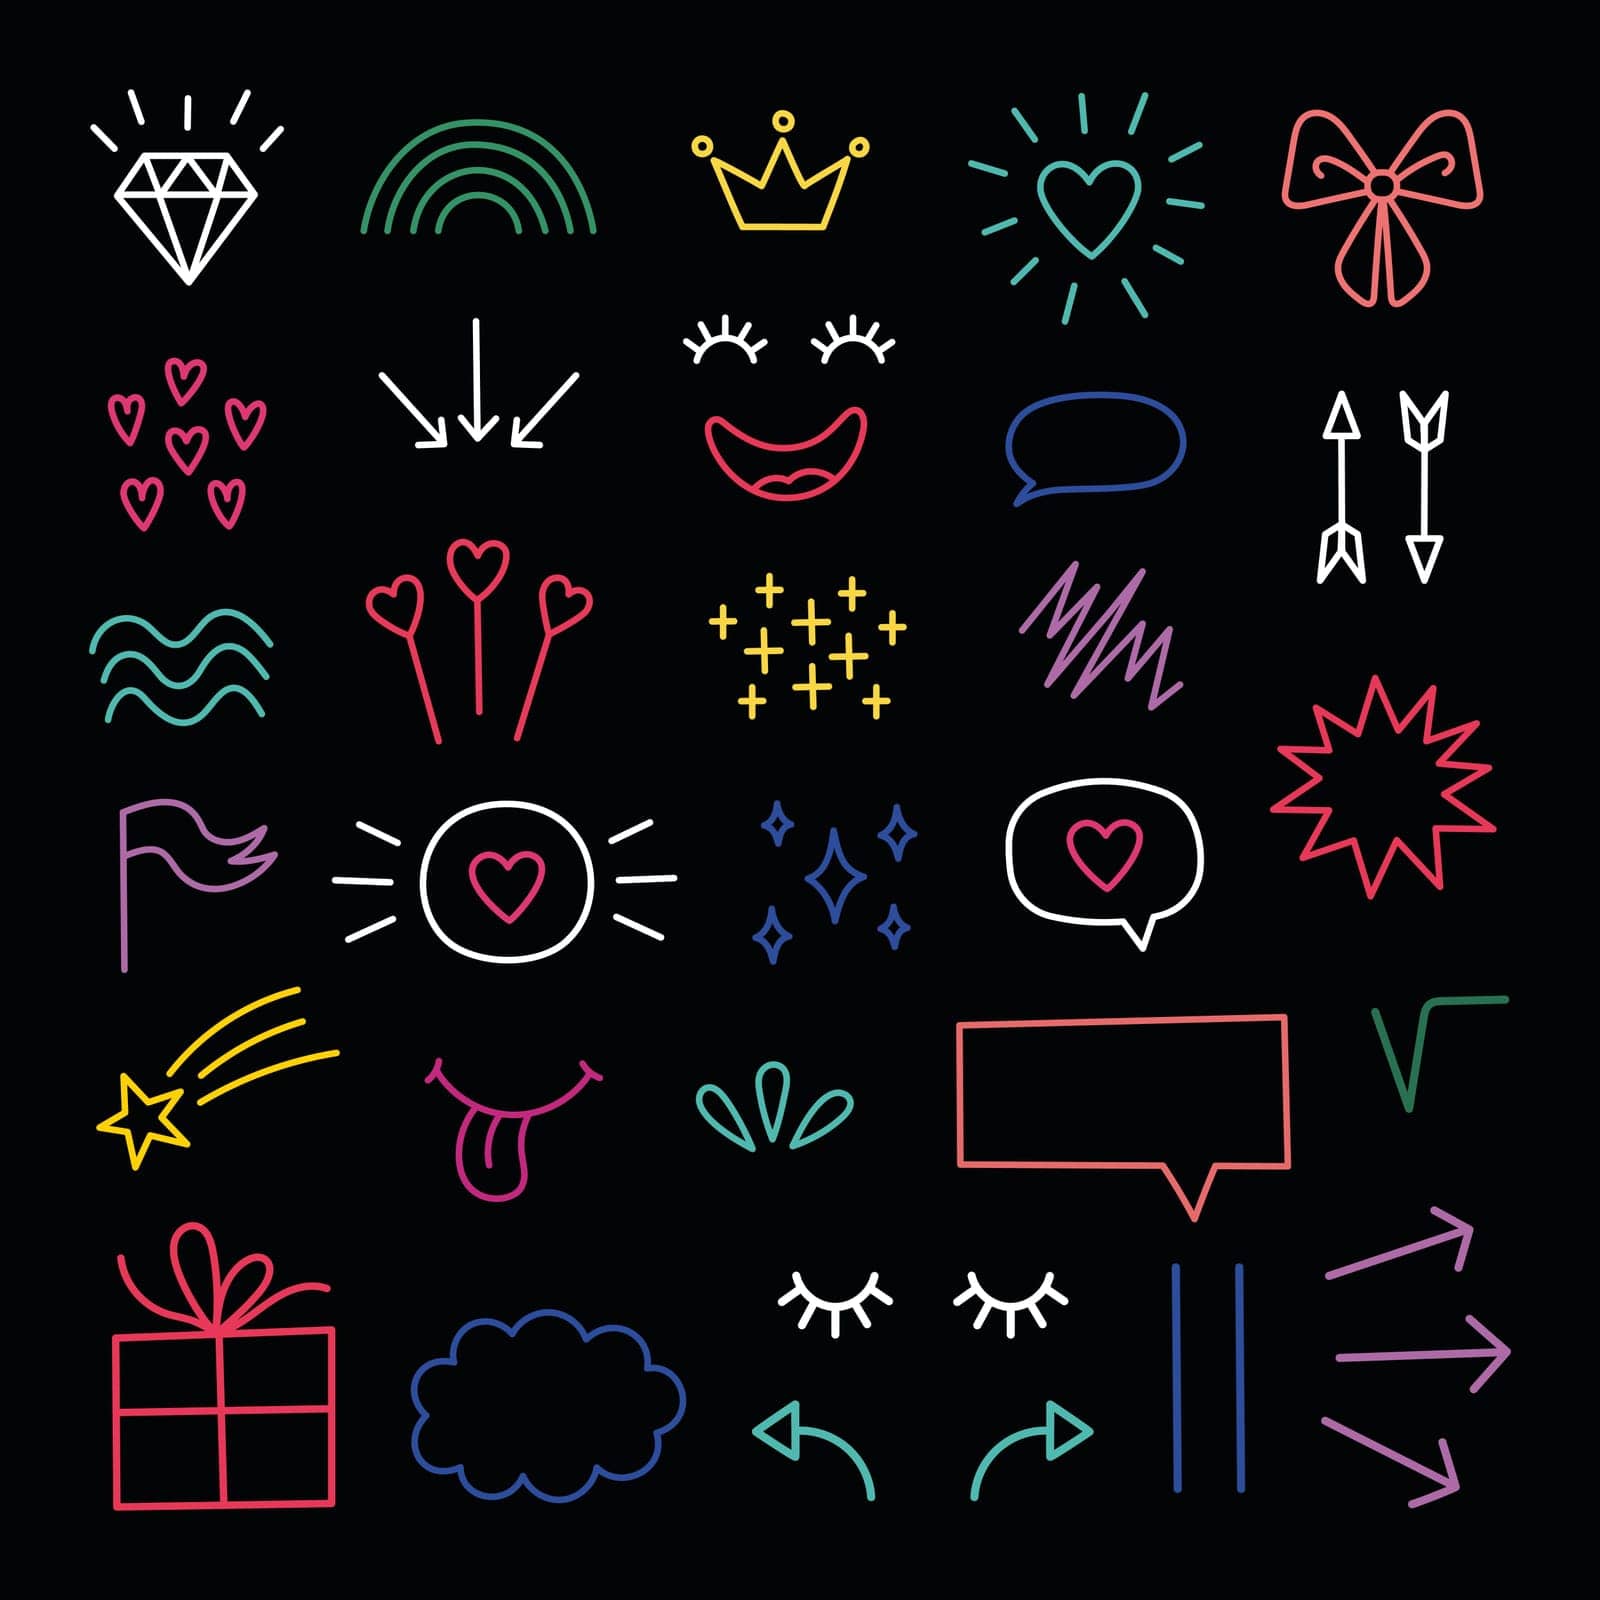 Hand drawn doodle elements set. Dark theme. Cartoon illustrations on black background. Neon elements. Hand drawn Abstract shapes. Doodles of hearts, rainbow, bows, stars, gifts, arrows.